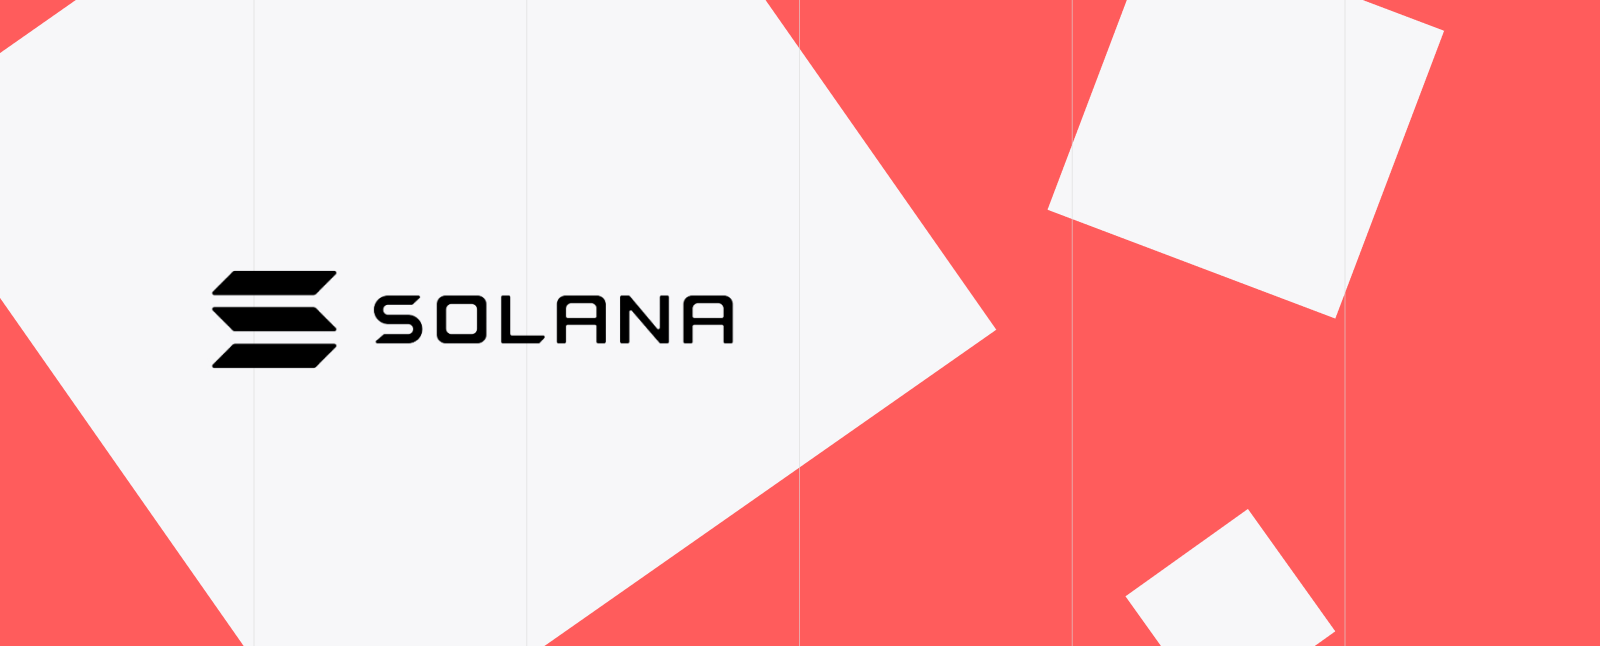 build smart contracts on Solana